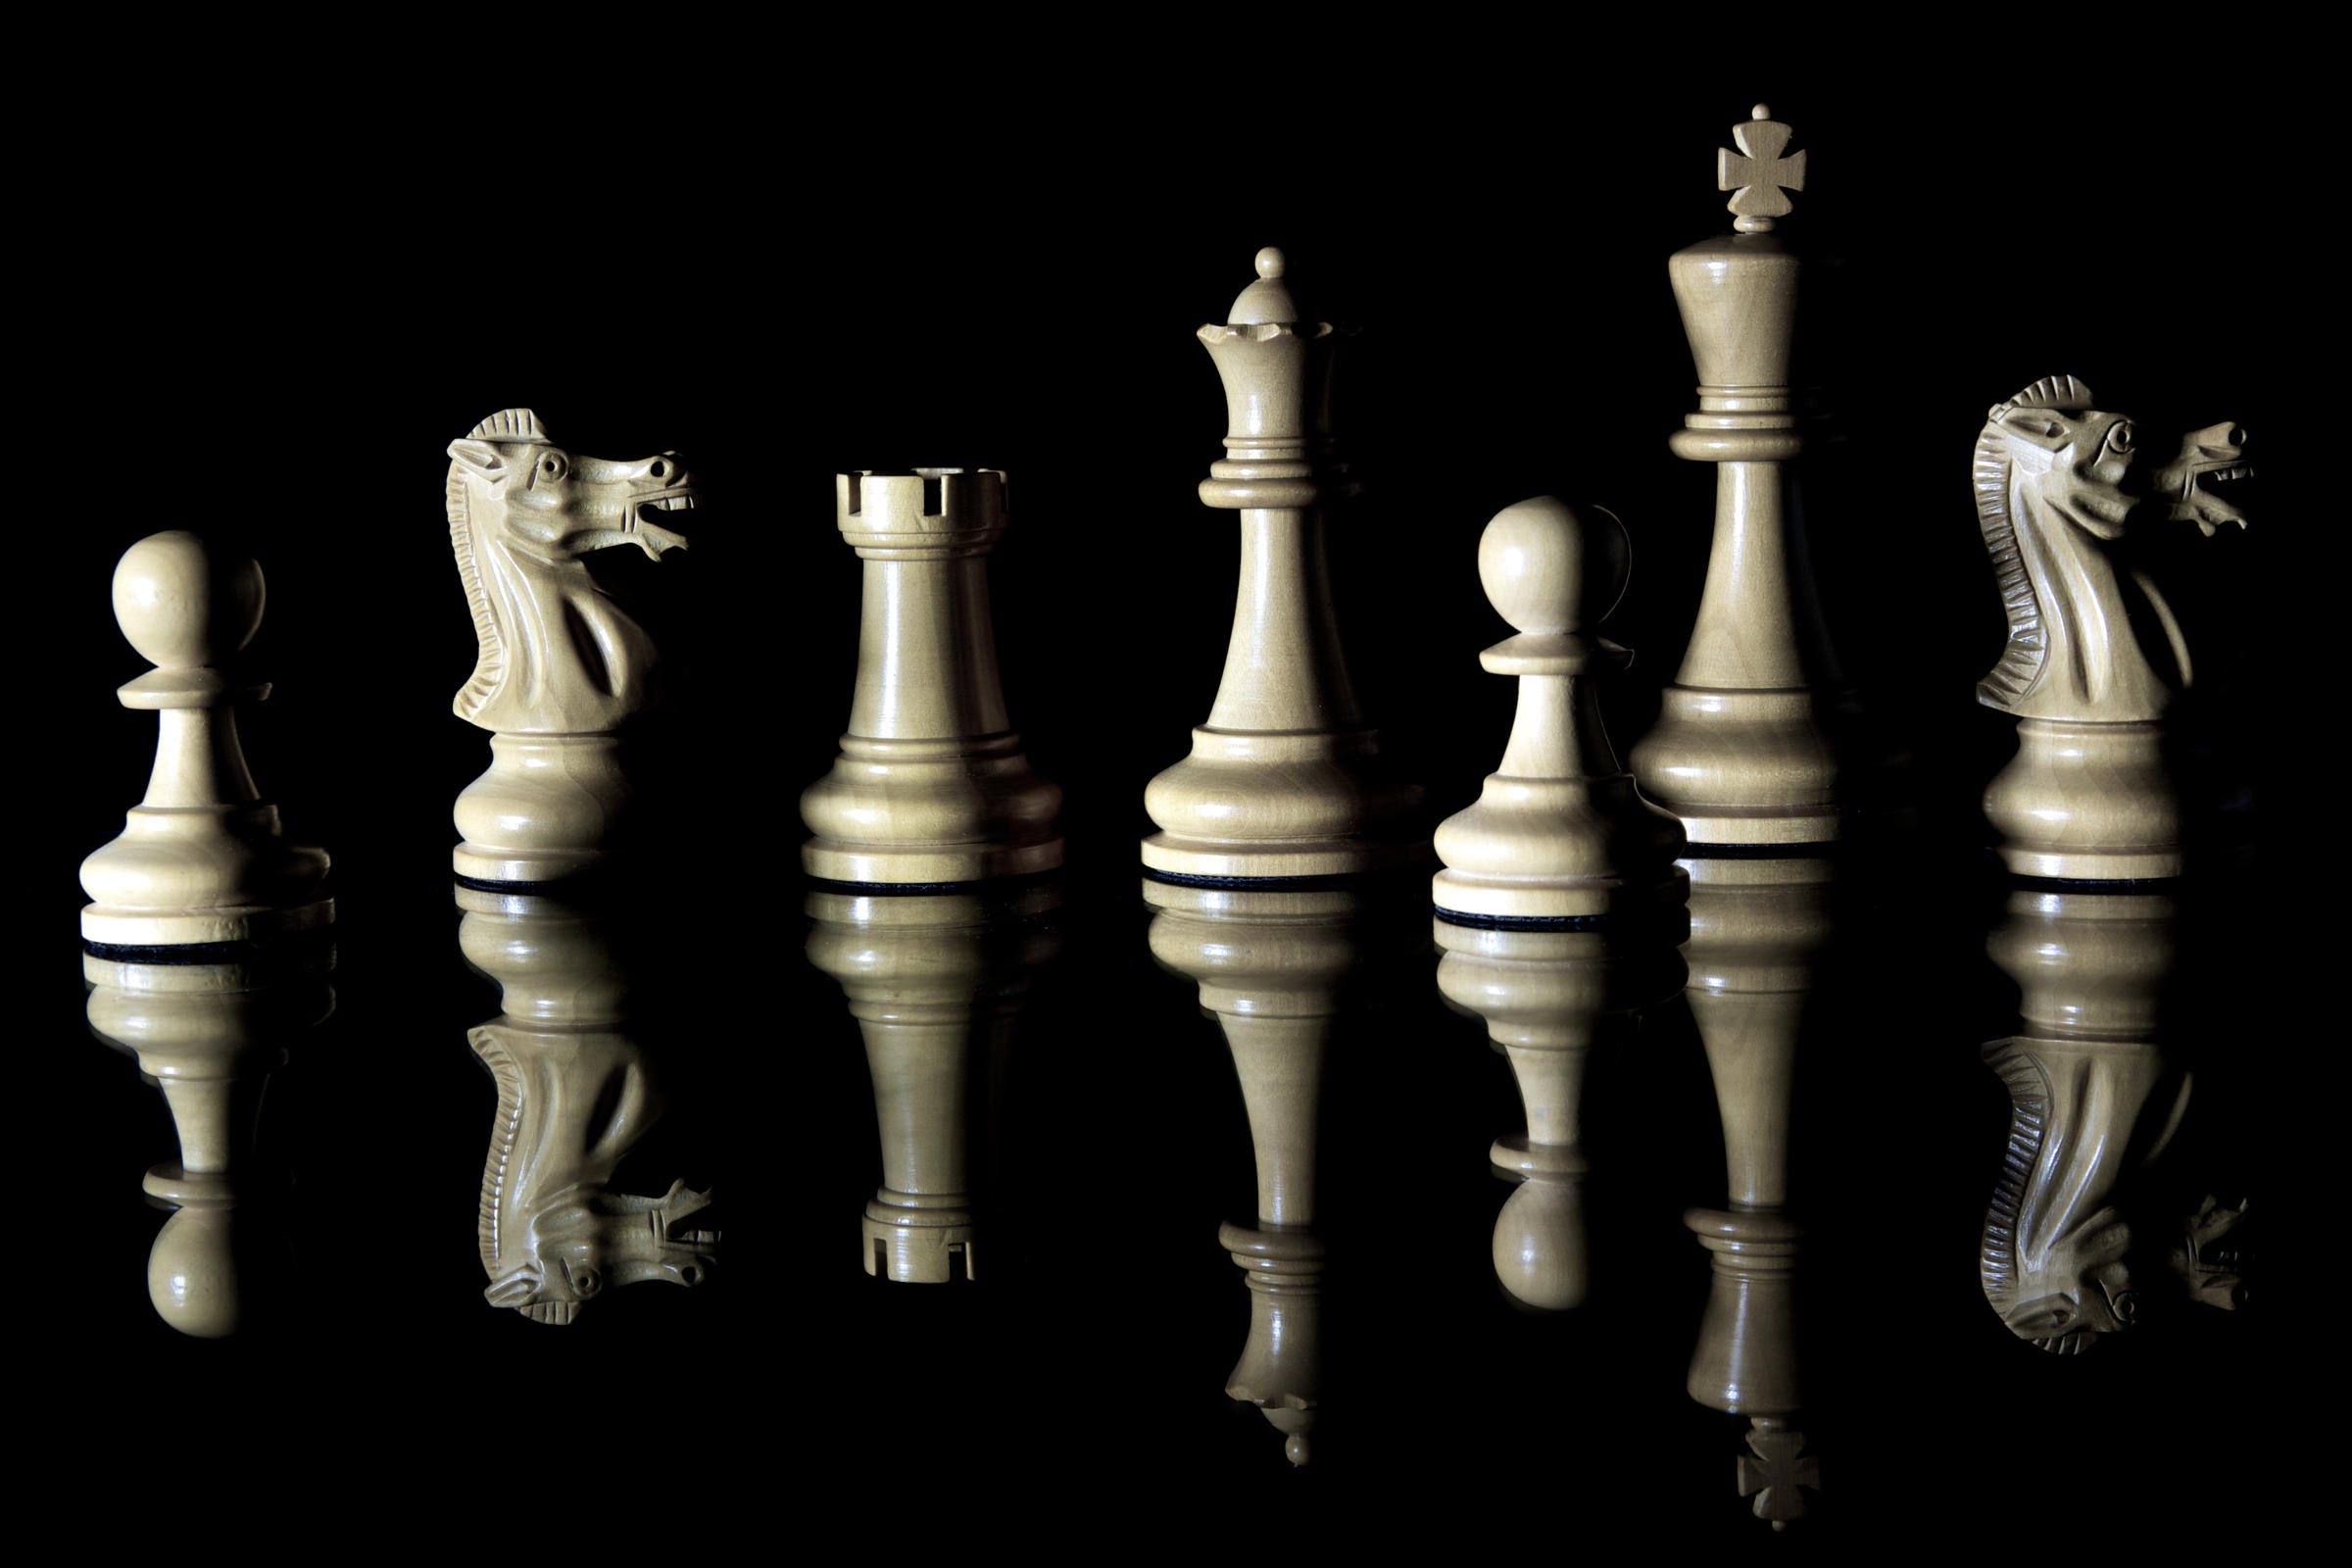 names of all the chess pieces